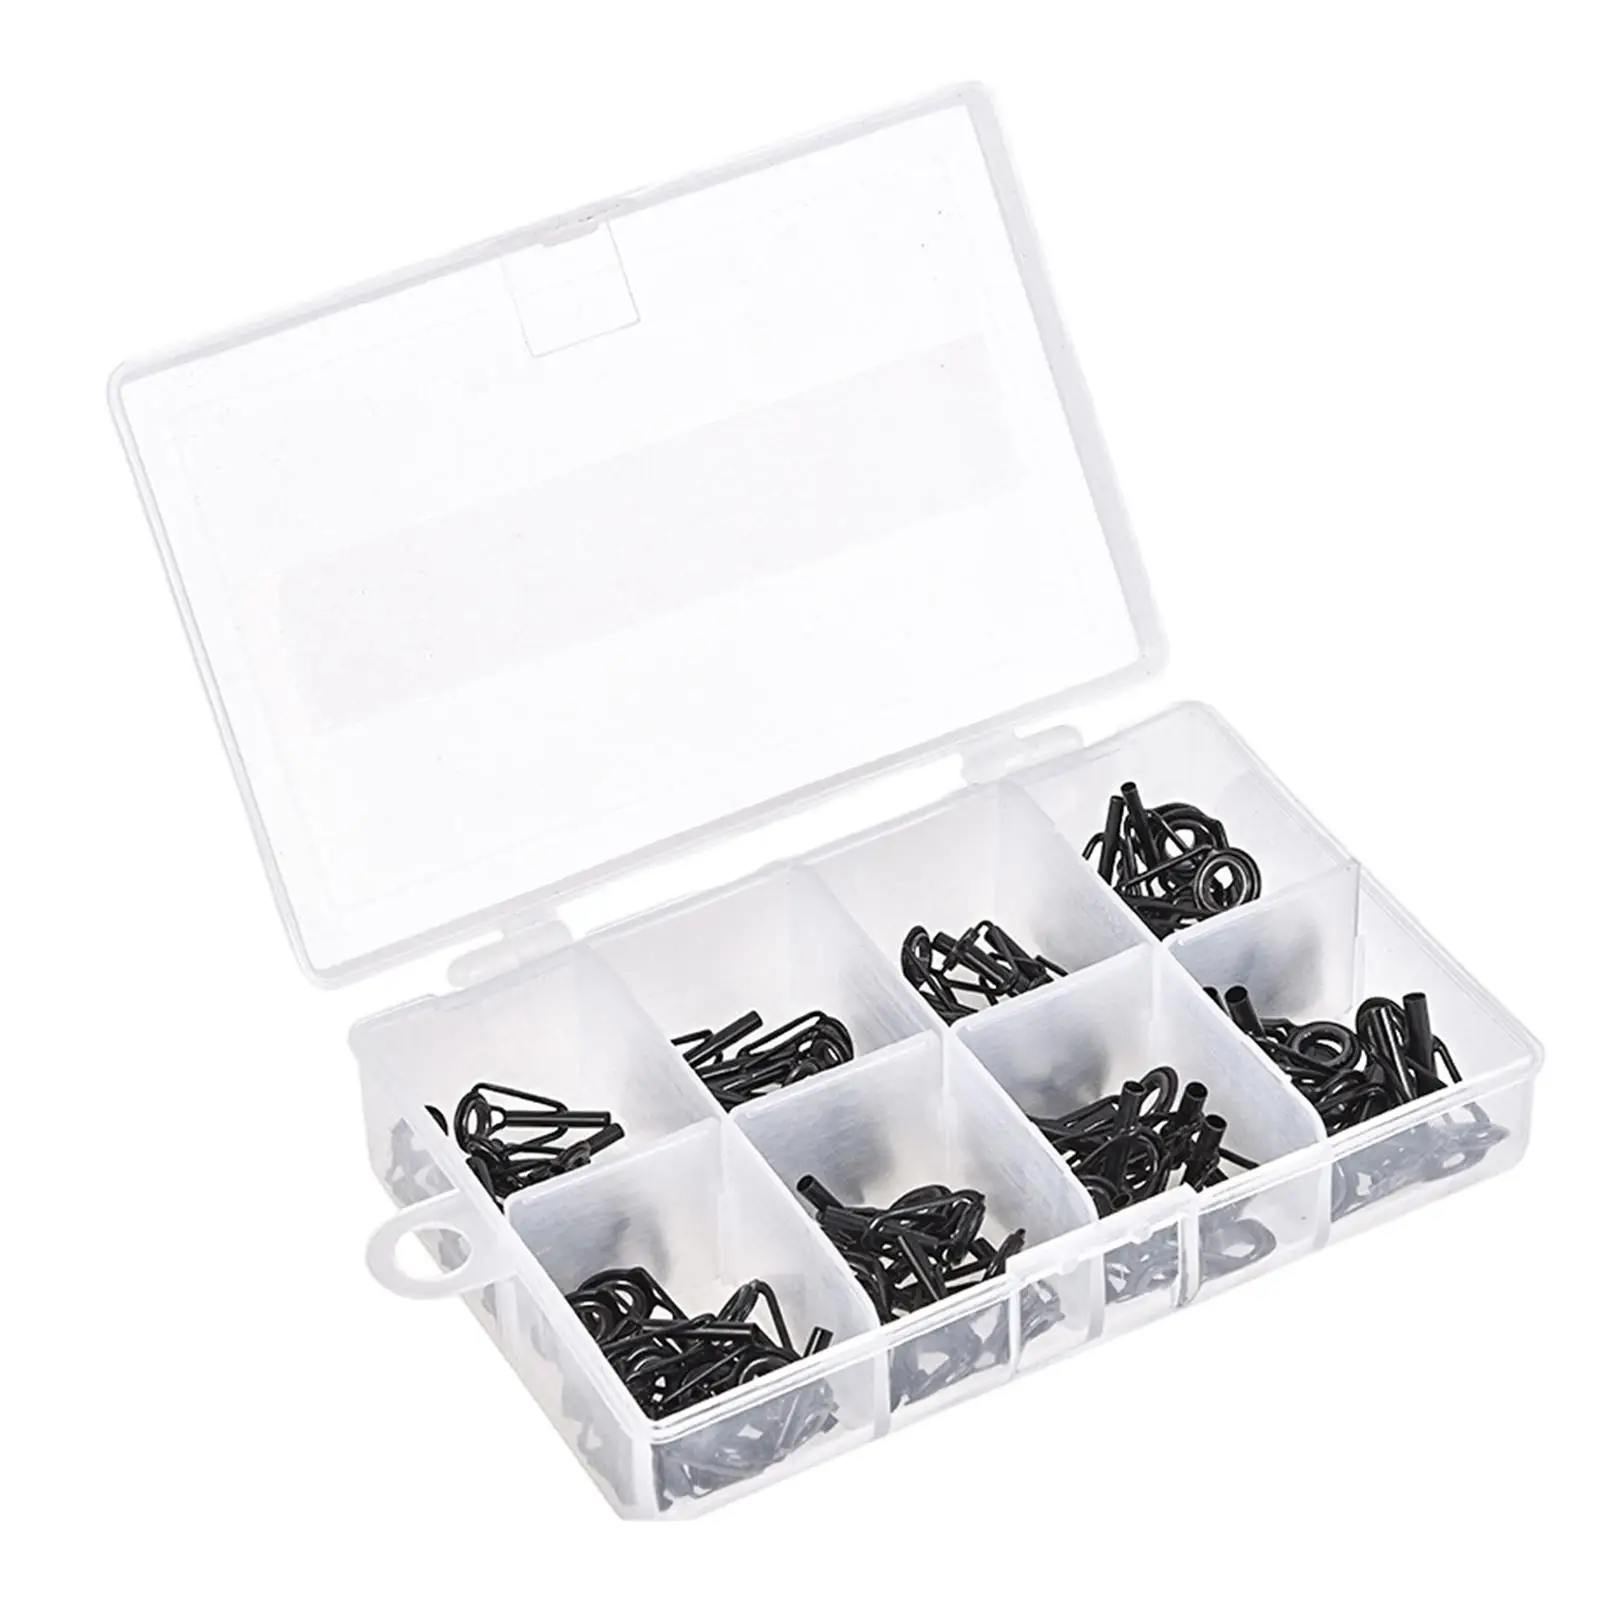 80x Fishing Rod Tips Mixed Size in A Box Replacement Stainless Steel Black